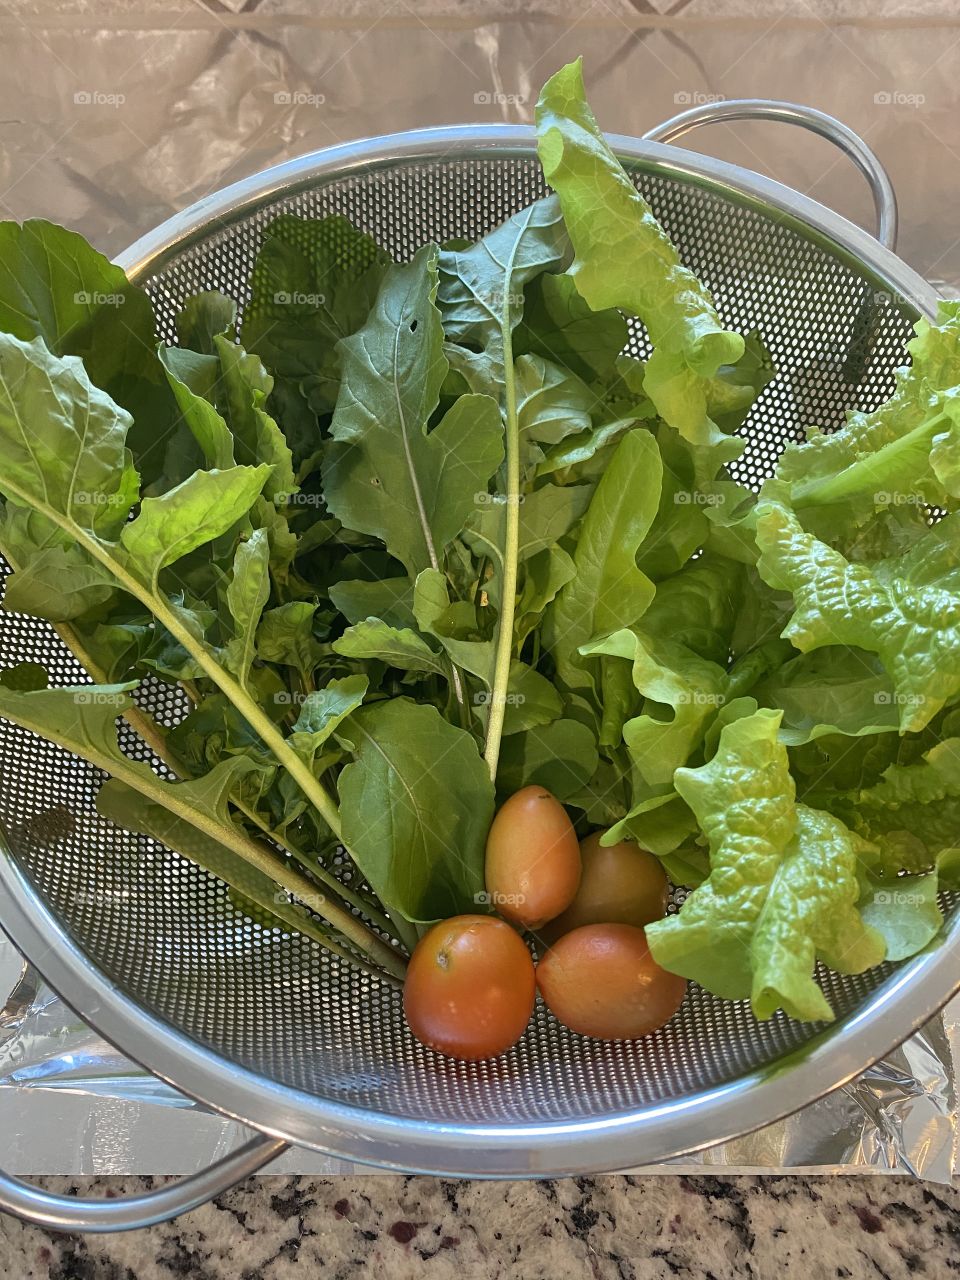 Three fresh, organic, homegrown and nutritious vegetables: arugula, lettuce and tomatoes